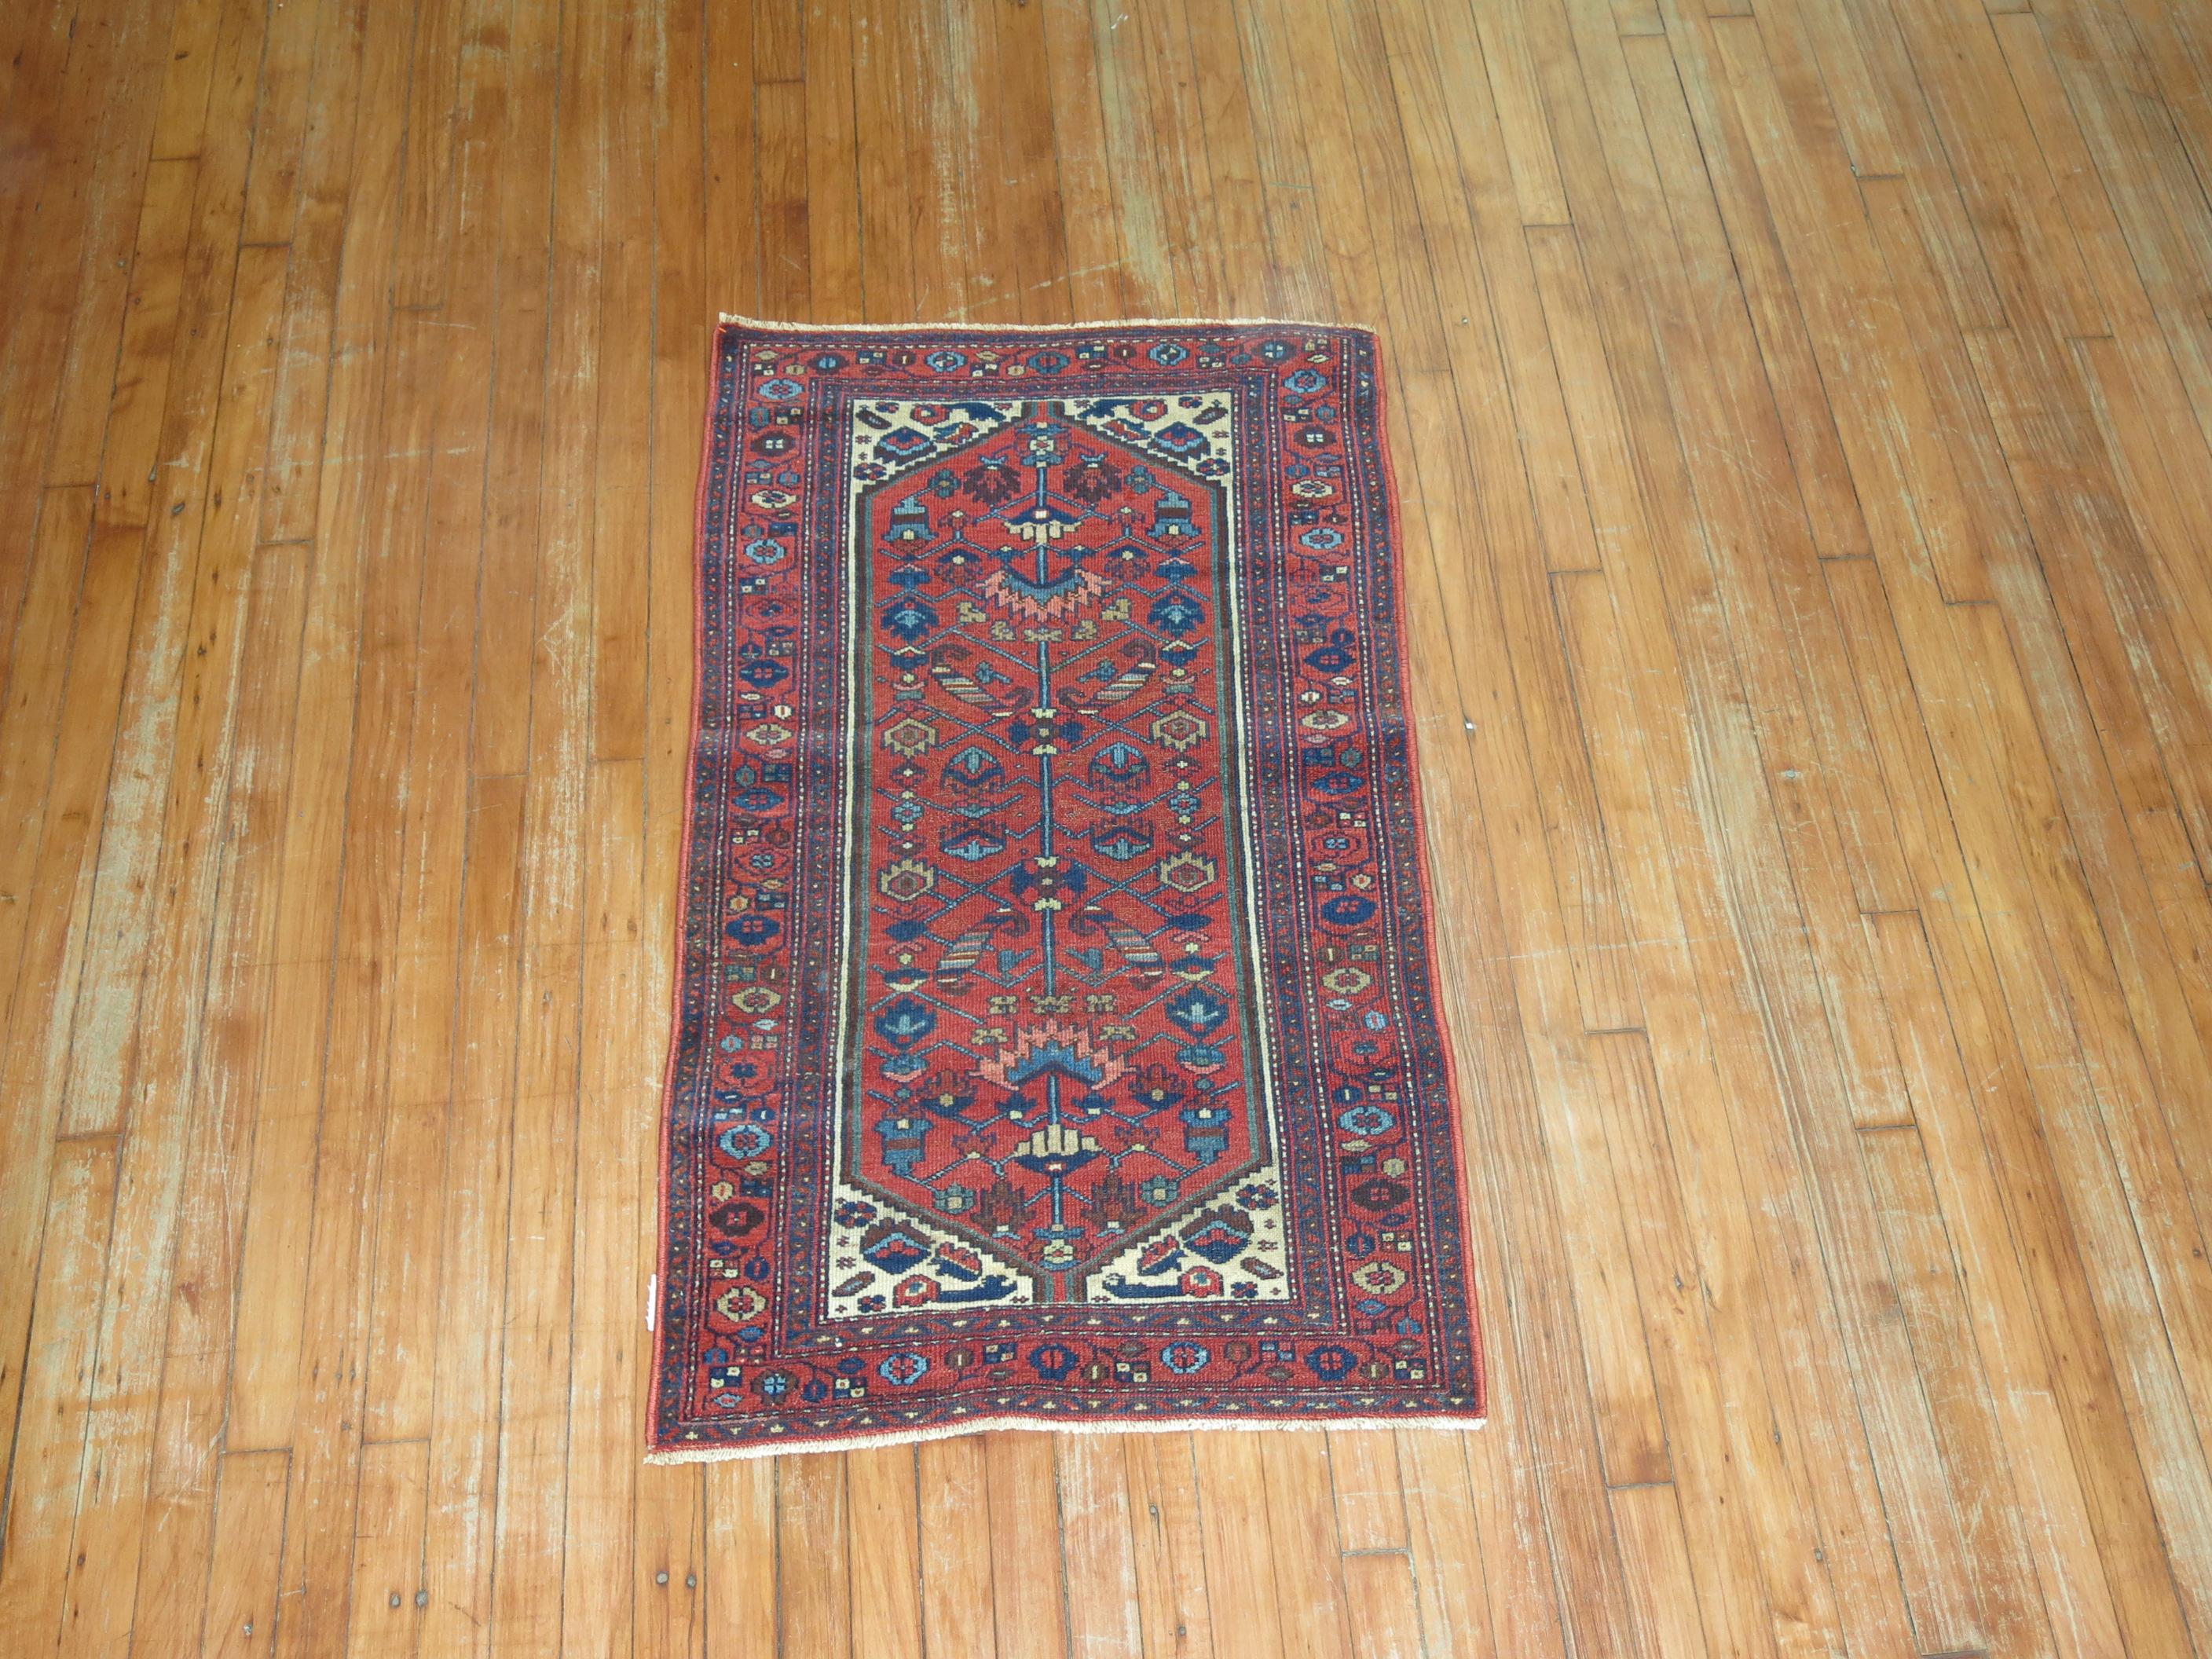 One of a kind Persian Hamedan Malayer rug from the 20th century in dominant red and blue tones.

Measures: 2'4” x 4'2”.